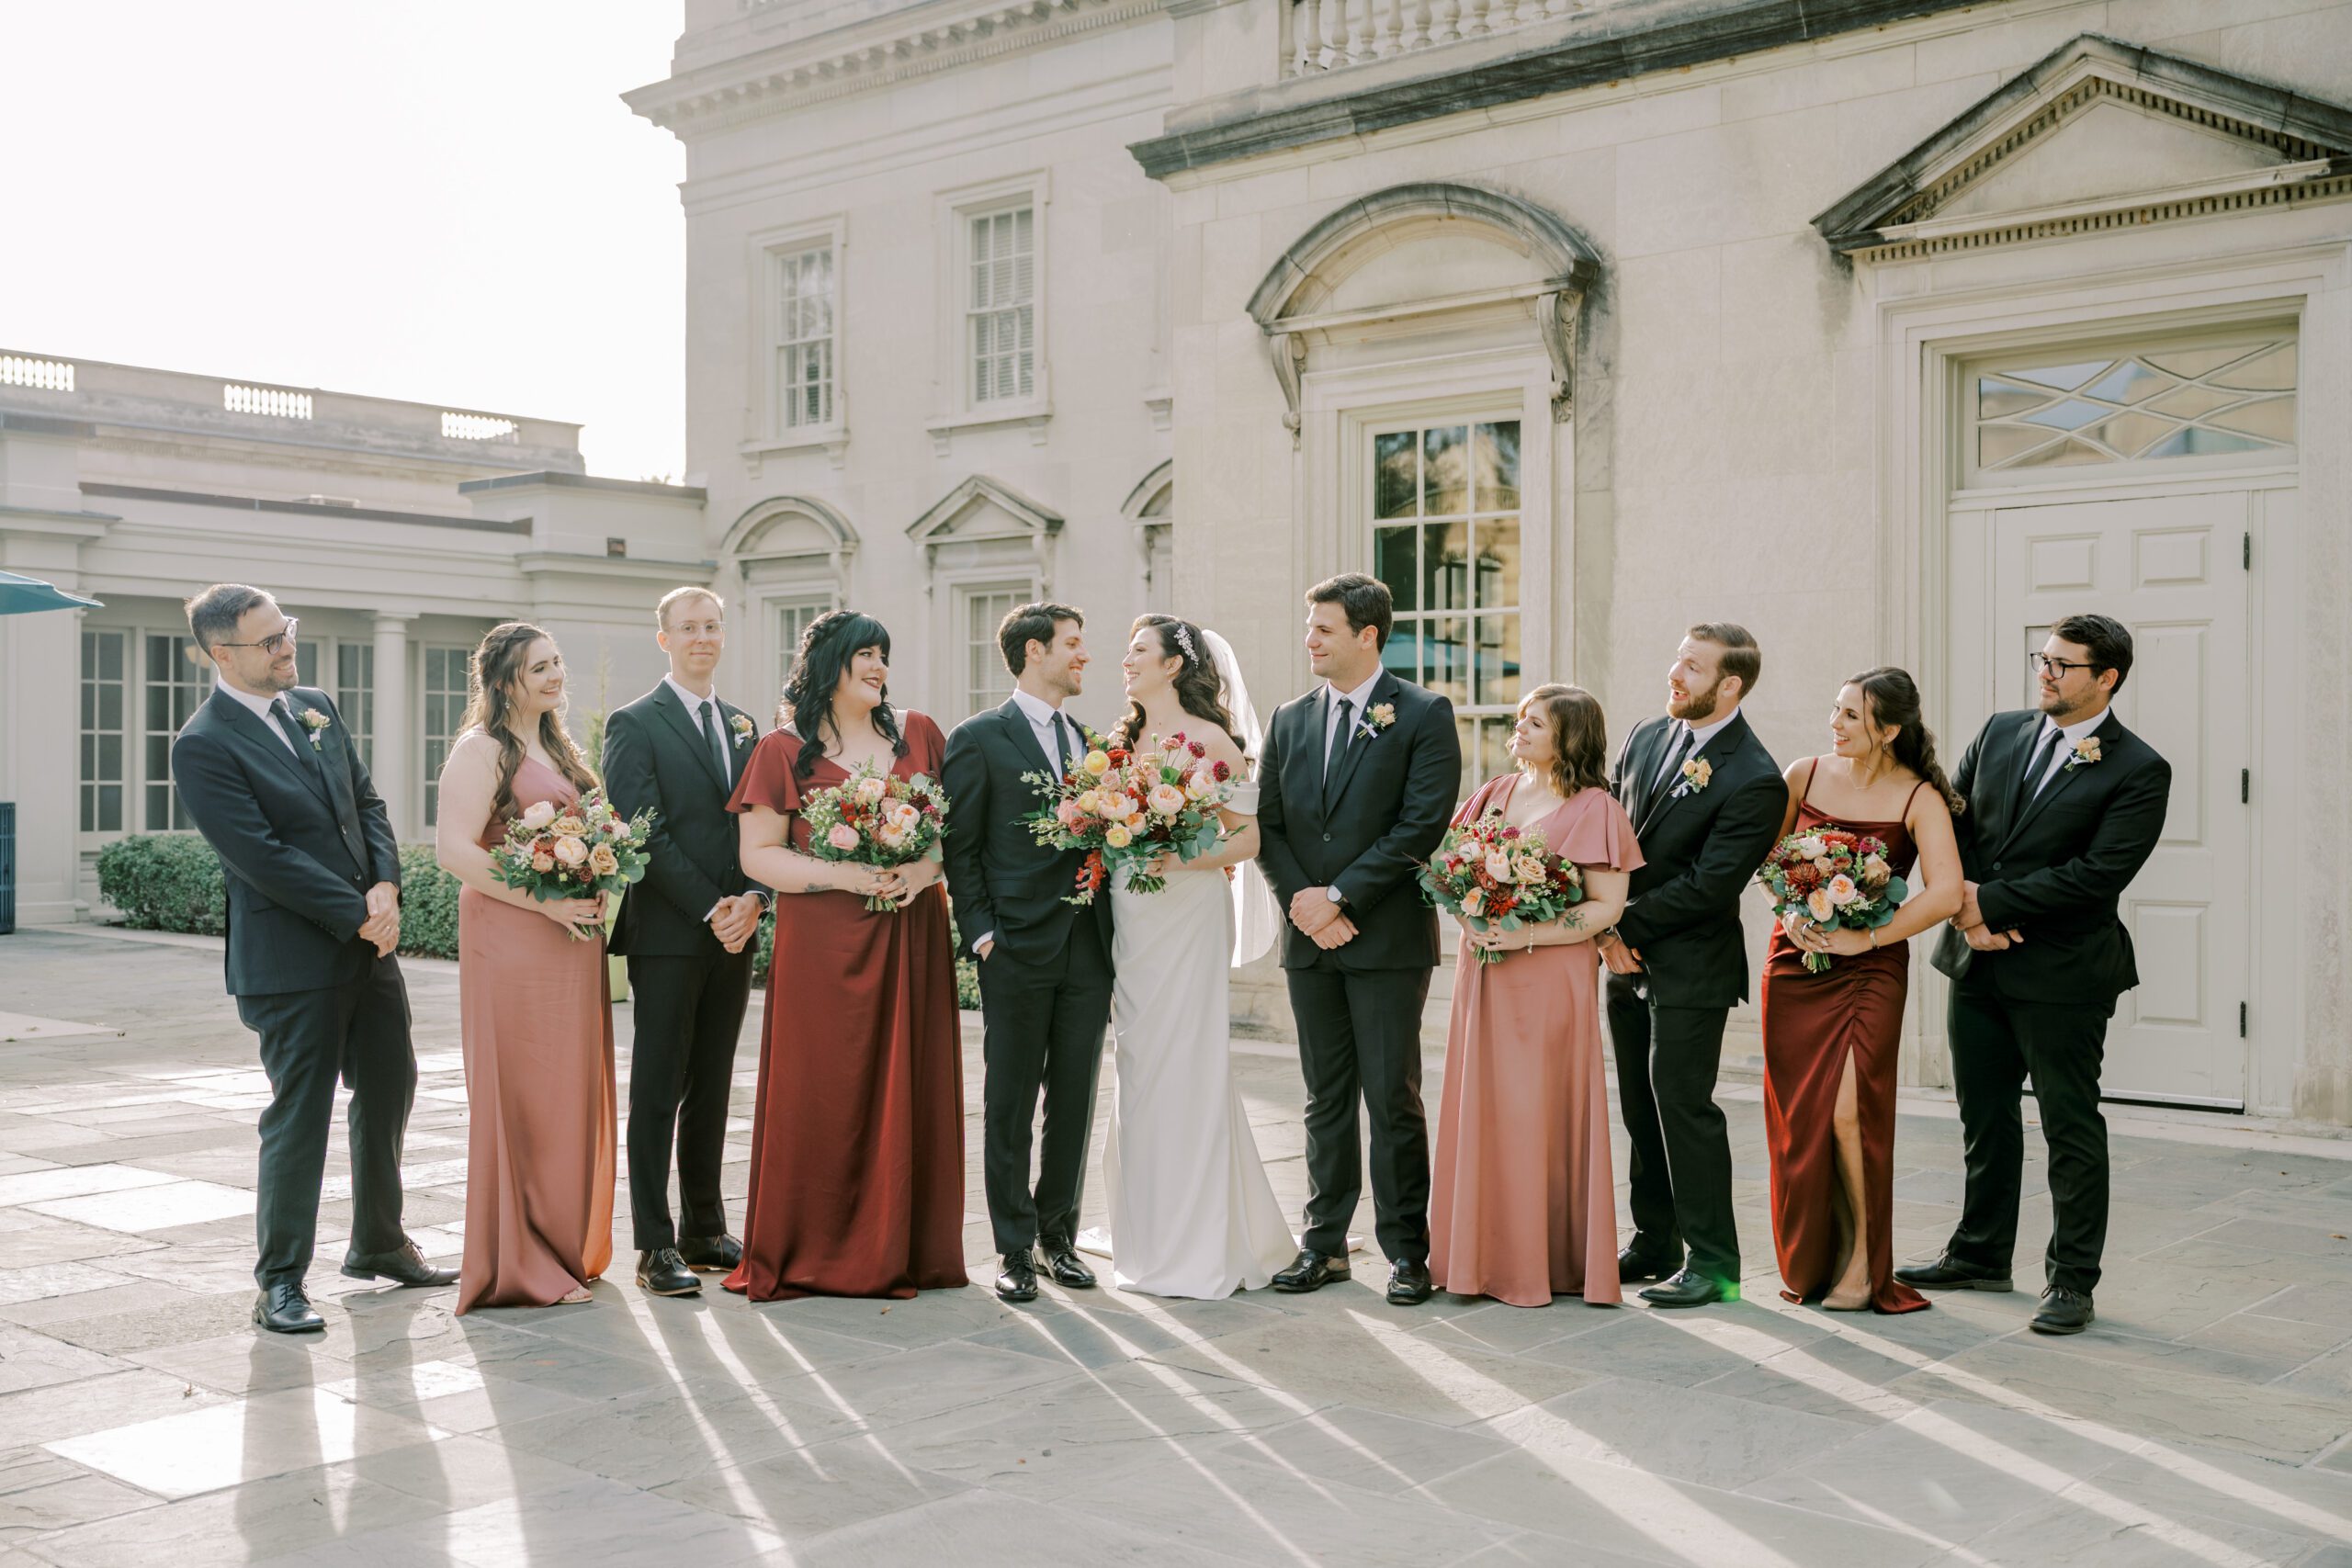 Entire wedding party alternating male and female, with bride and groom in center of line